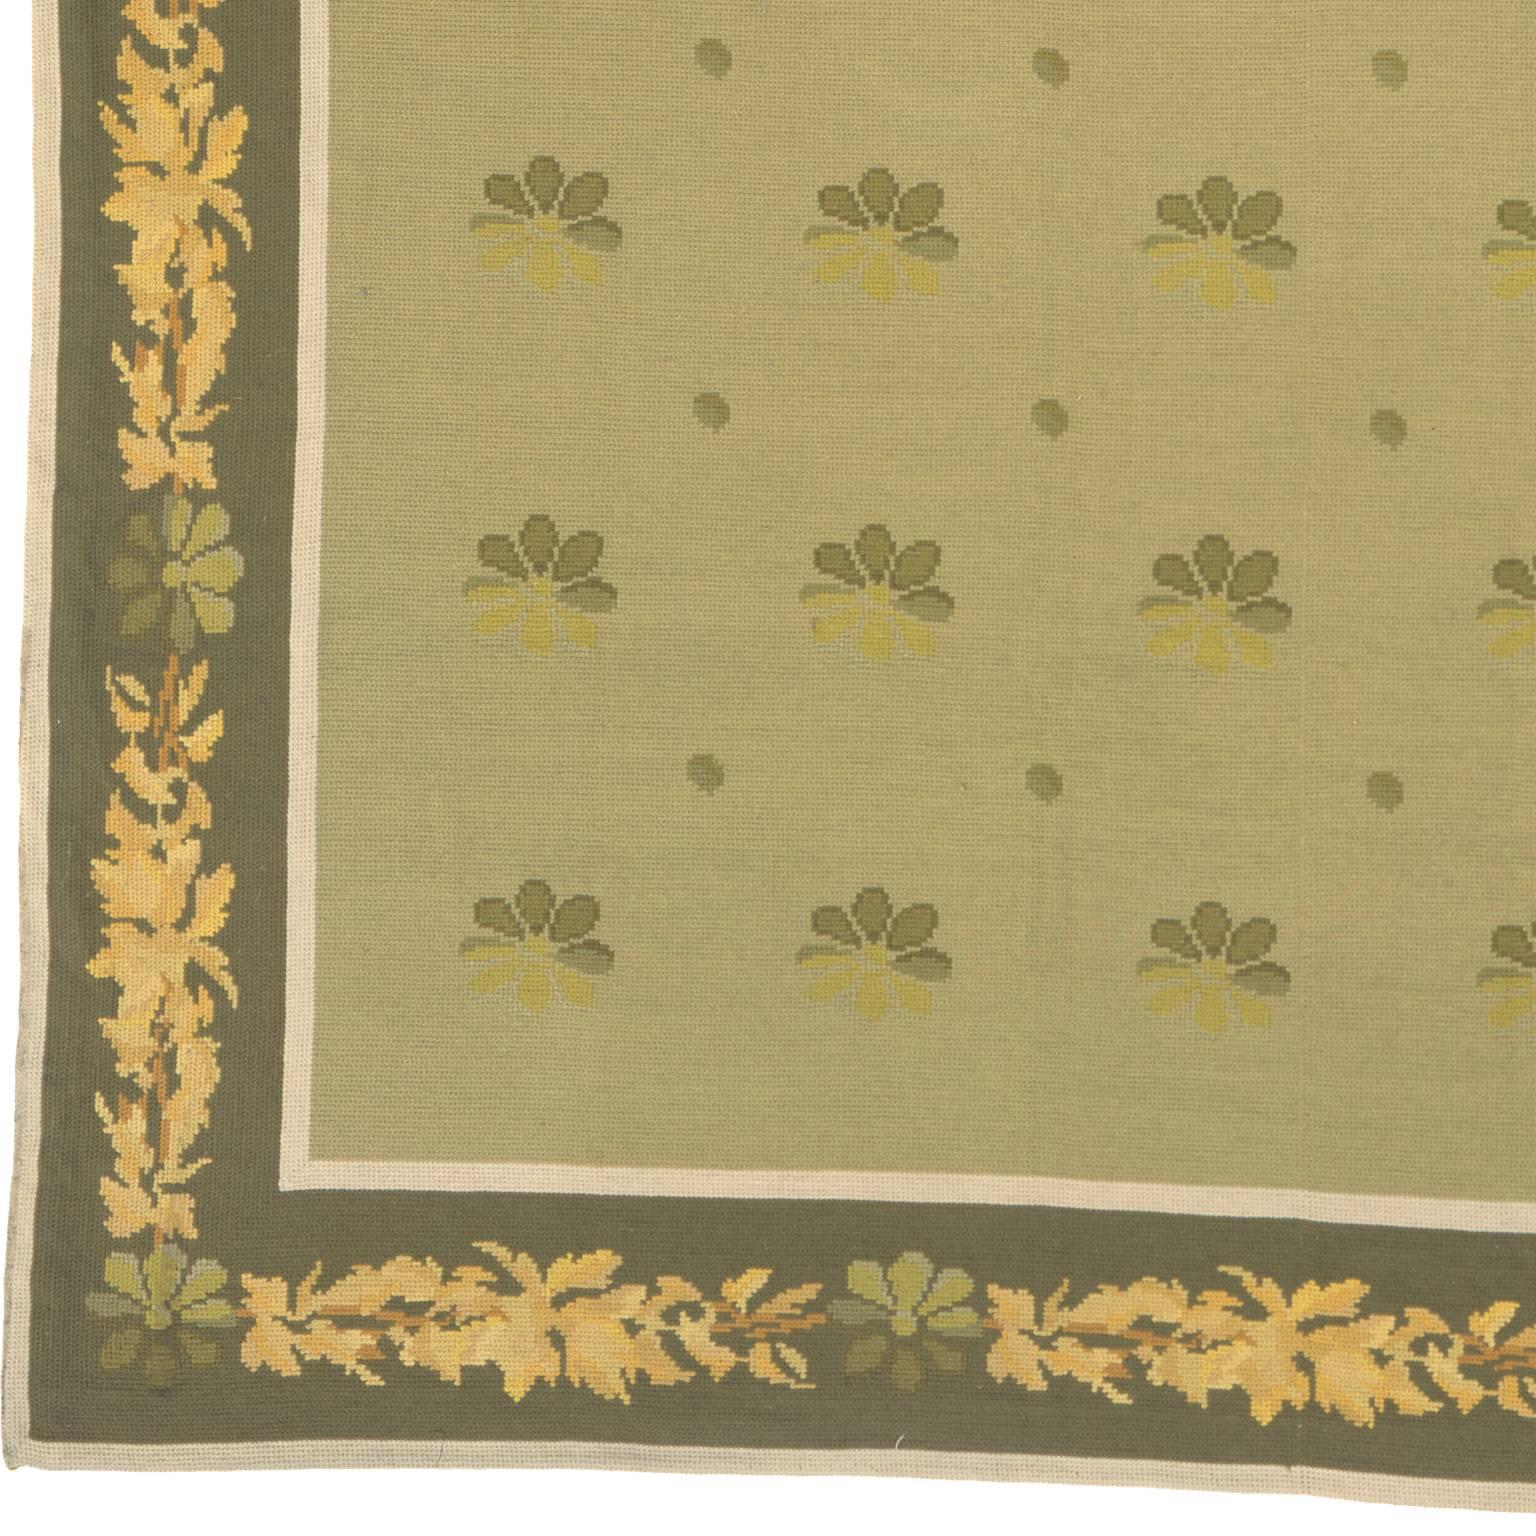 Arraiolos carpet, 1940
Portugal, circa 1940
The light green field with scattered stylized rosettes and dots in a moss green border of angular serrated leaves and rosette vine between plain stripes.